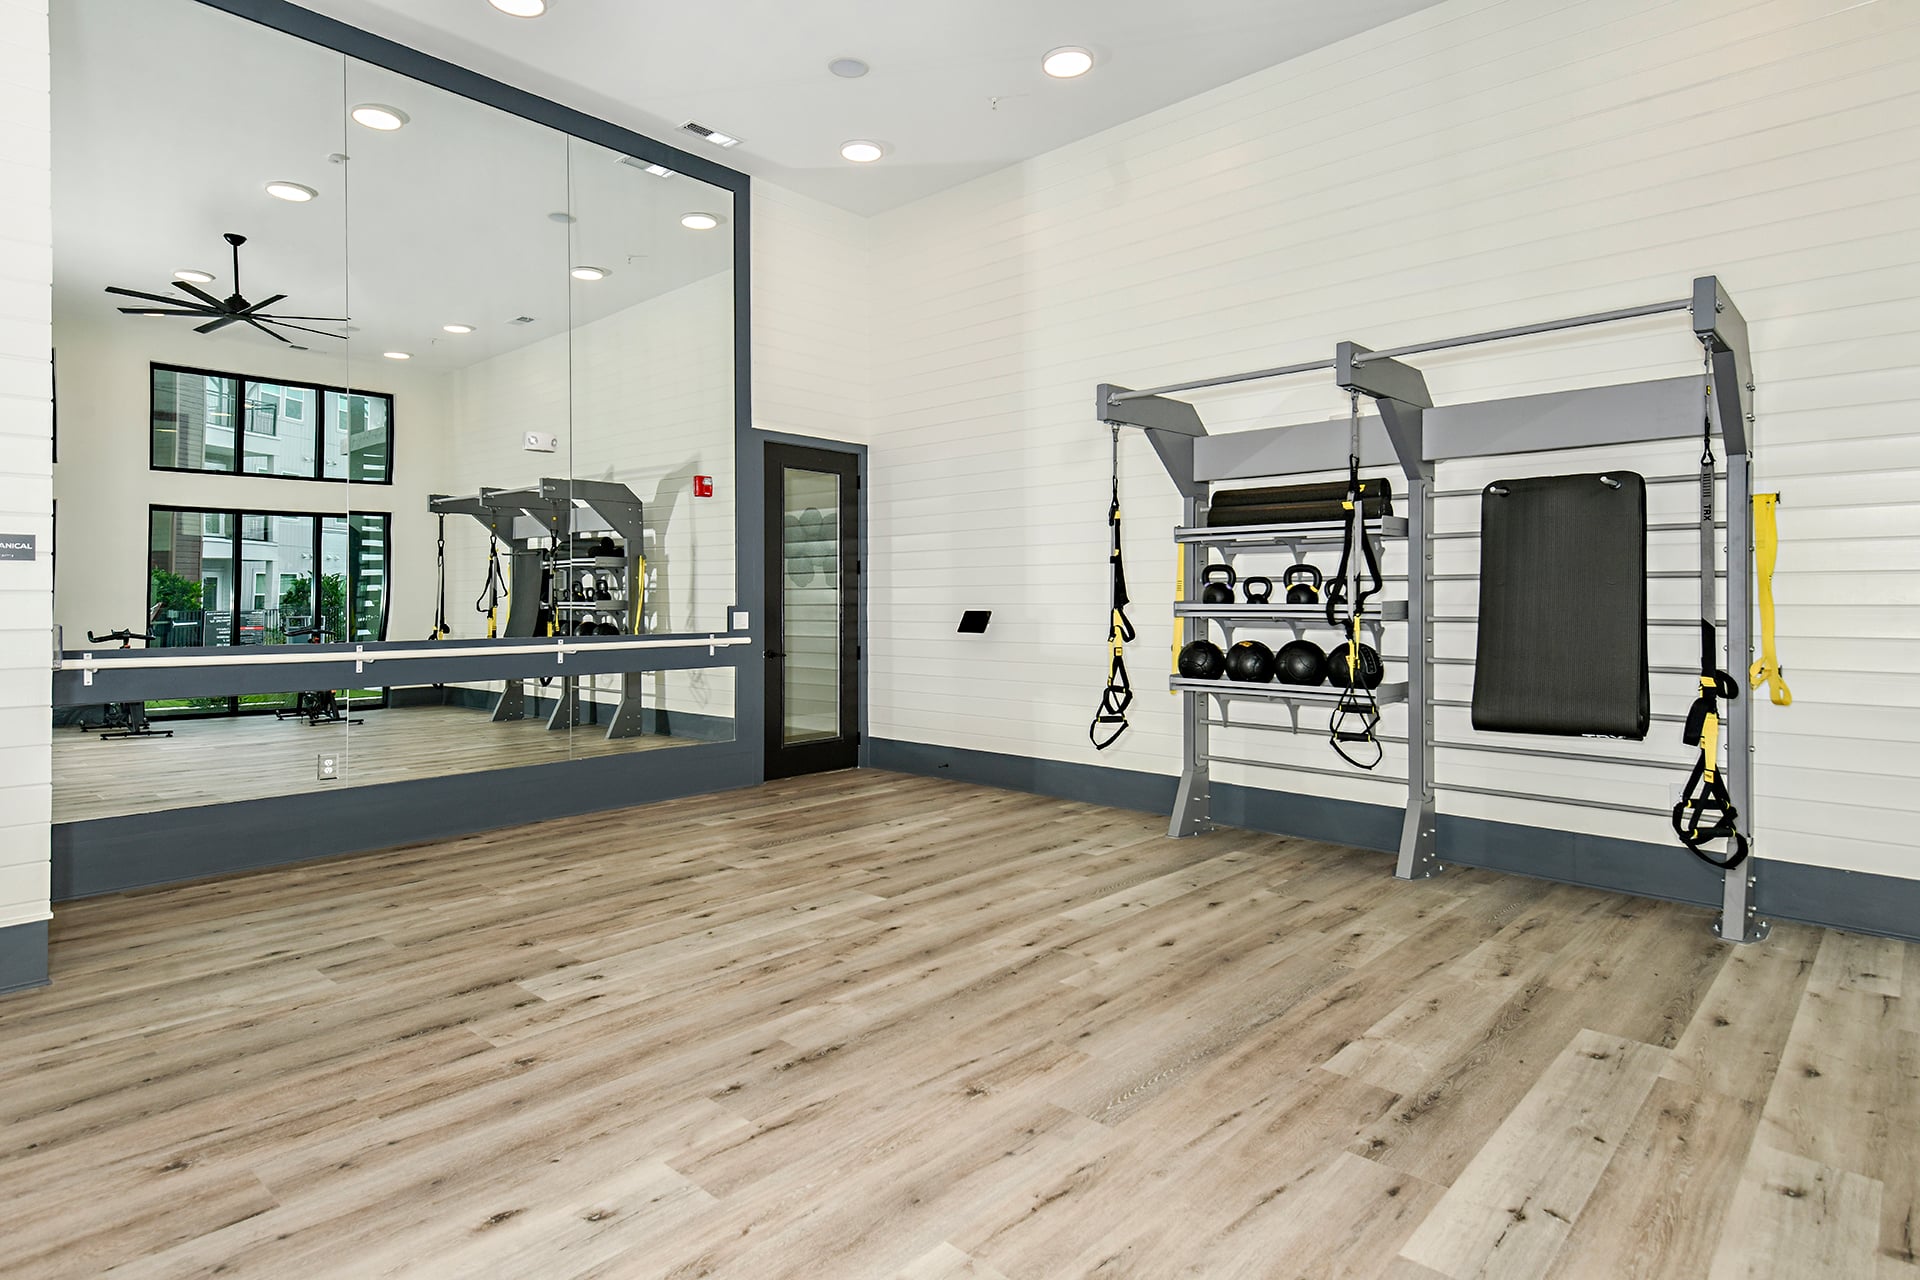 A gym room with mirrors and exercise equipment.